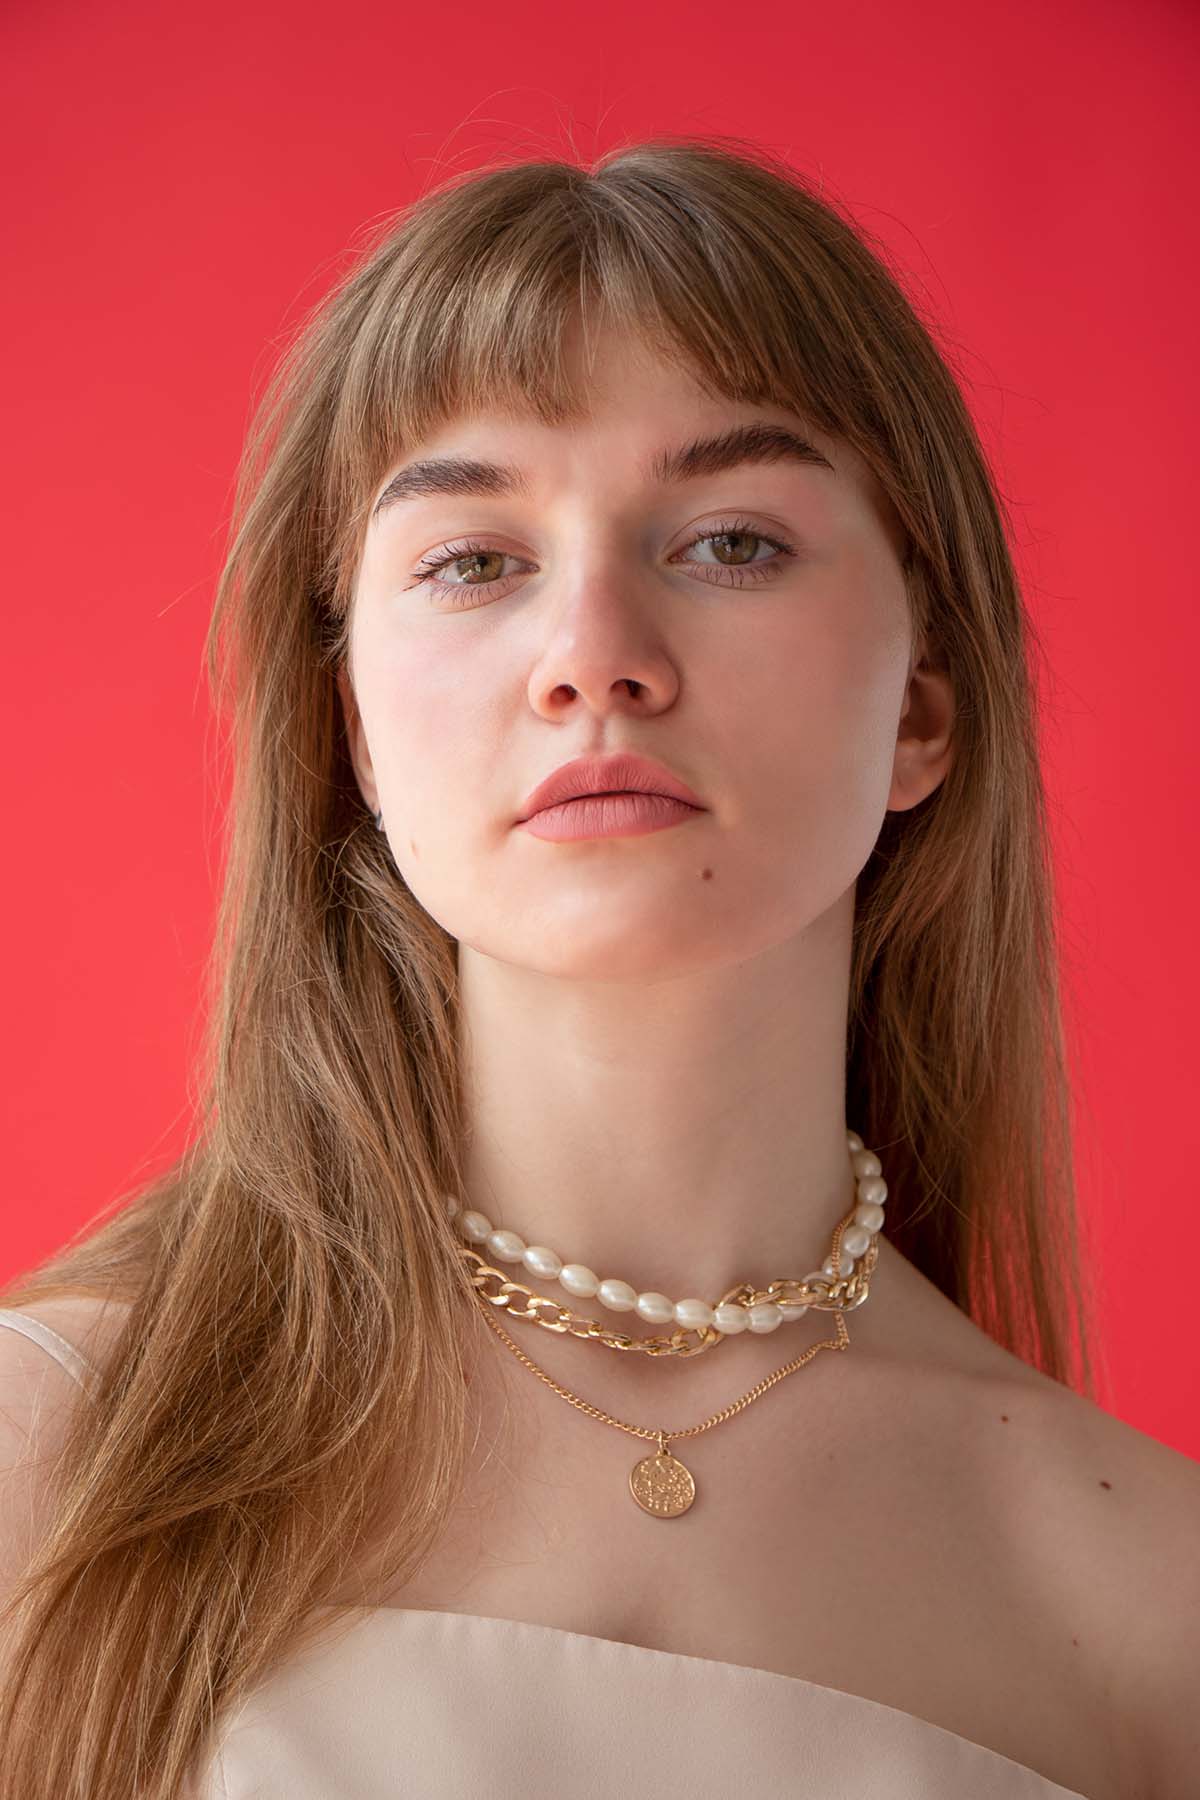 Pearls Are the Jewelry Trend of the Moment